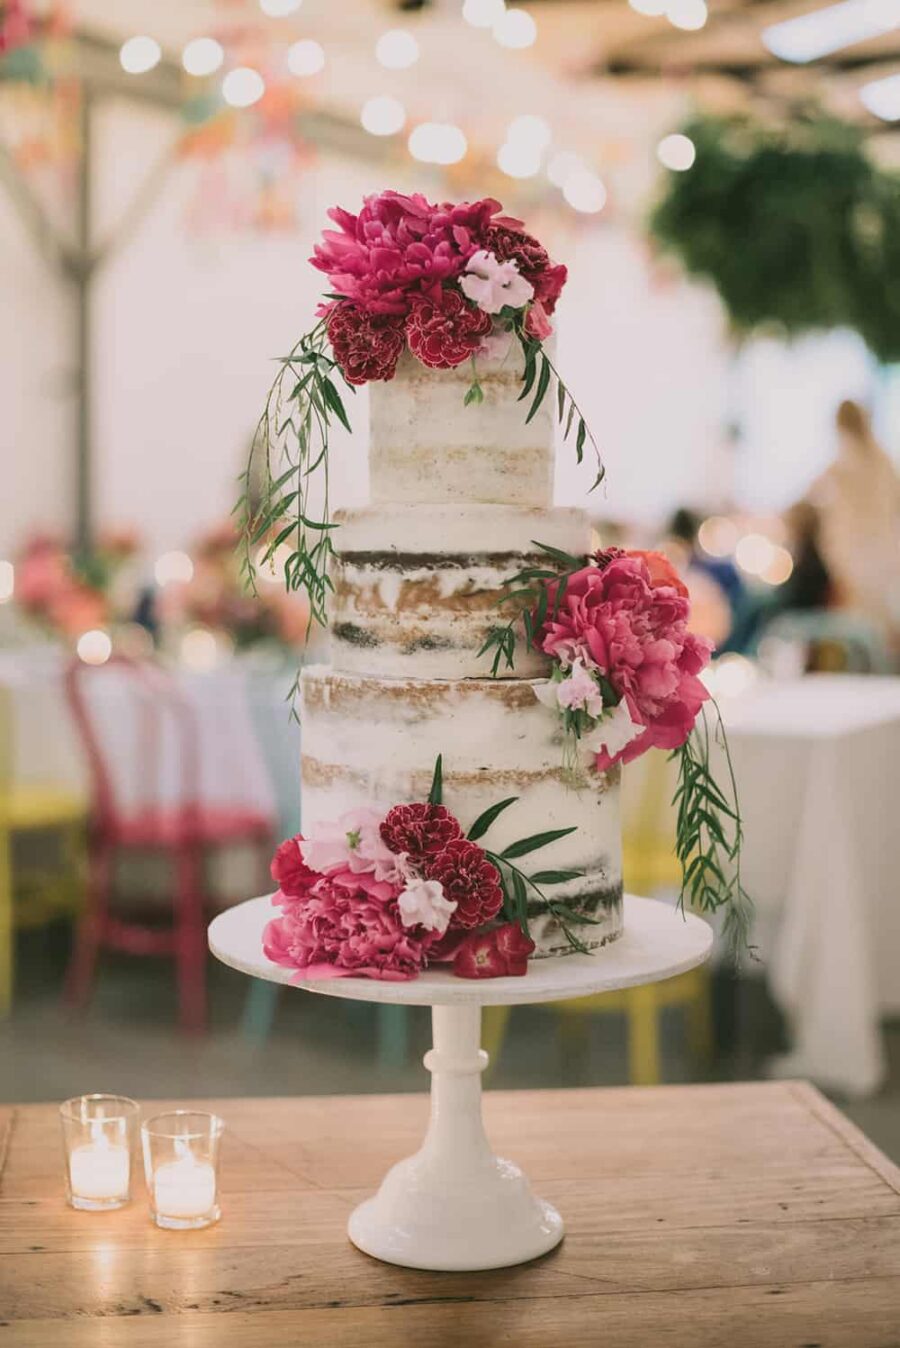 3 tier semi-naked wedding cake decorated with fresh pink flowers